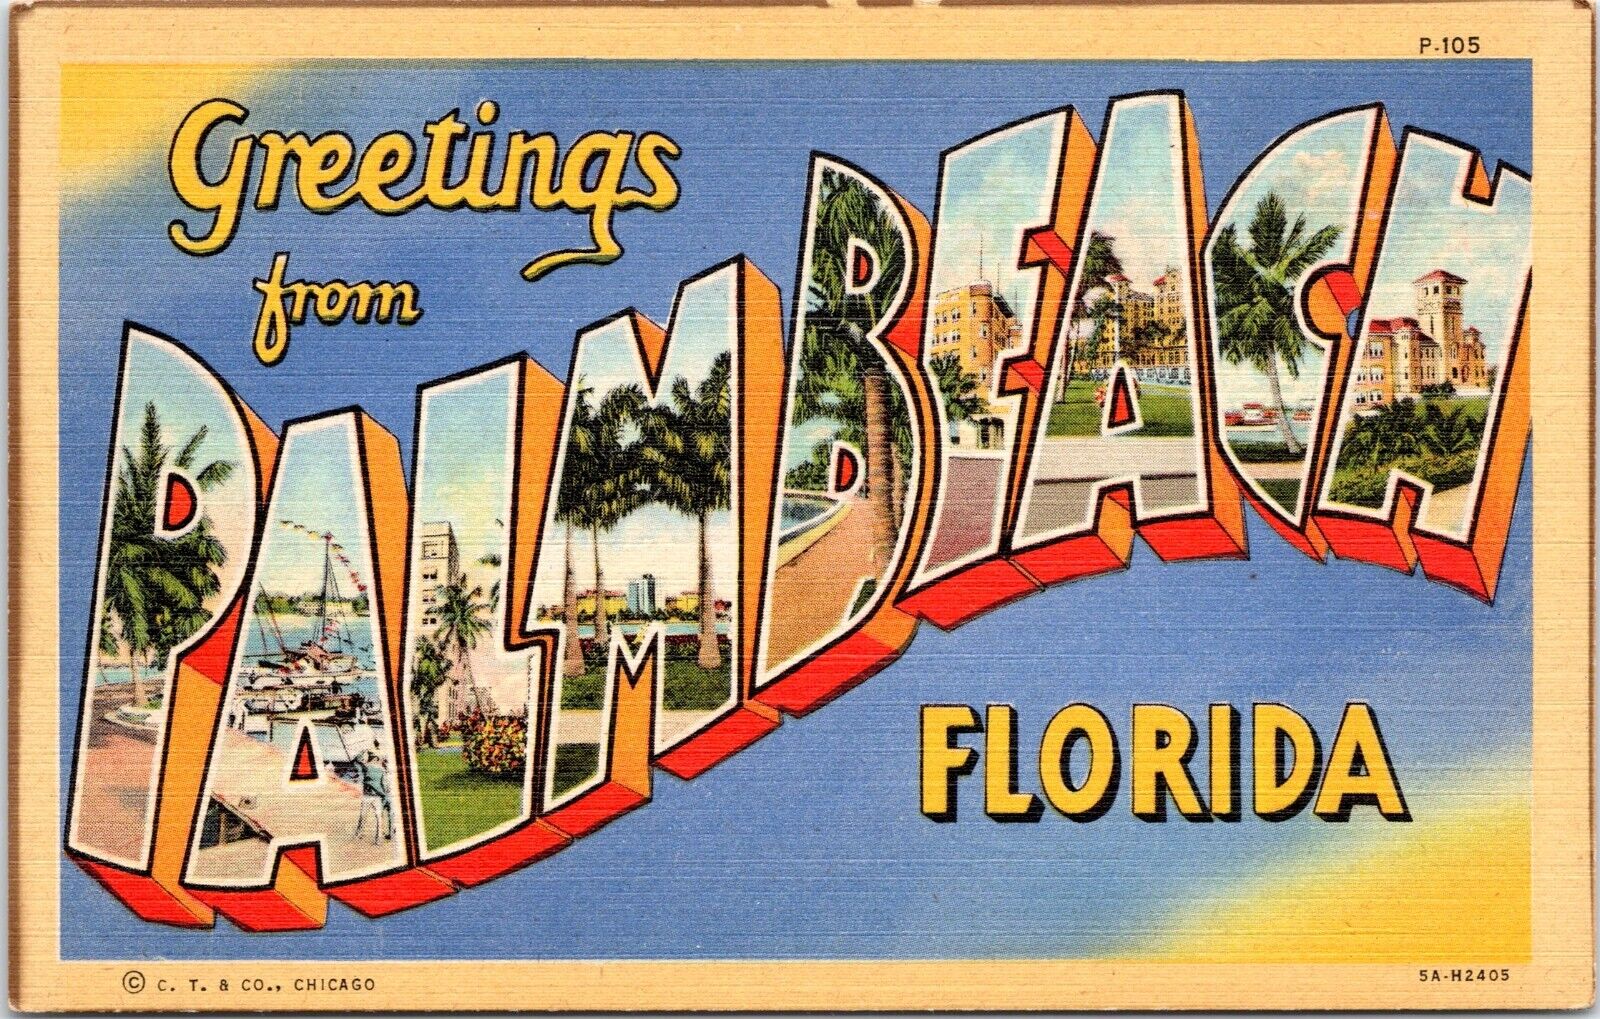 Large Letter Greetings from Palm Beach Florida - 1935 Linen Postcard- Curt Teich